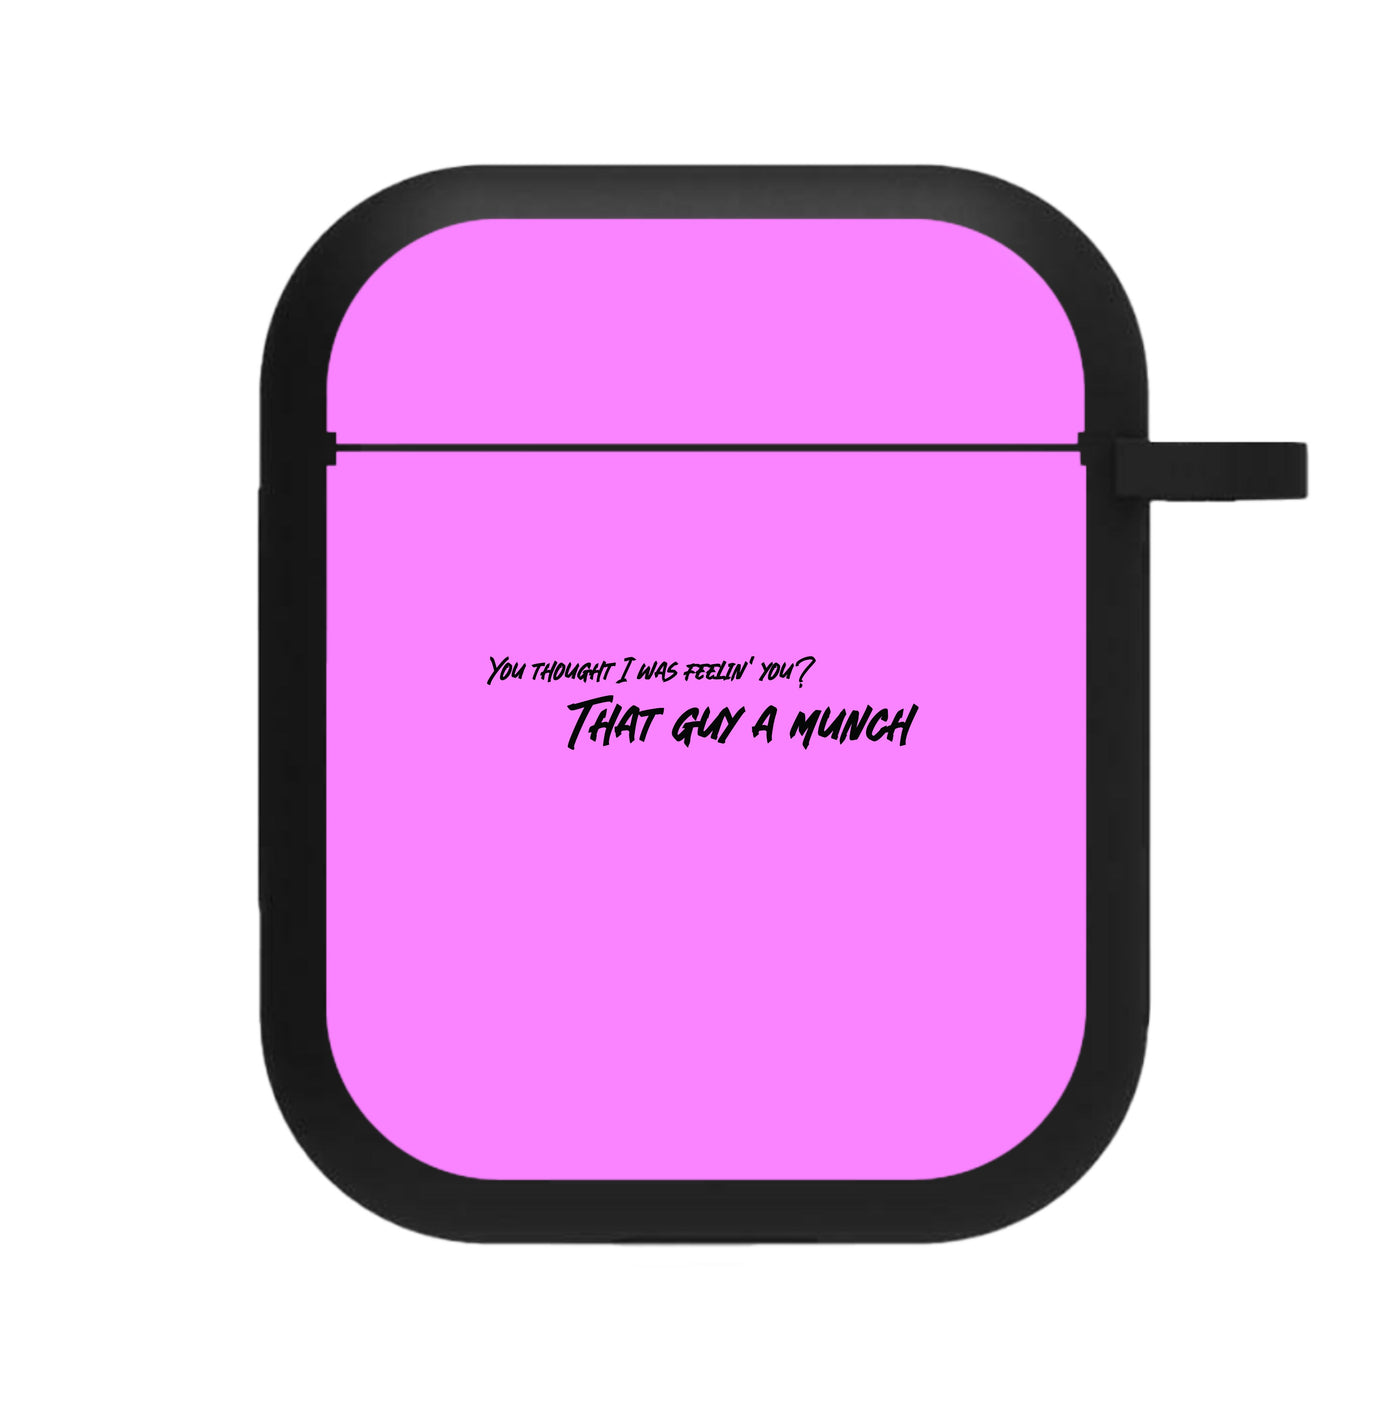 You Thought I Was Feelin' You - Ice Spice AirPods Case